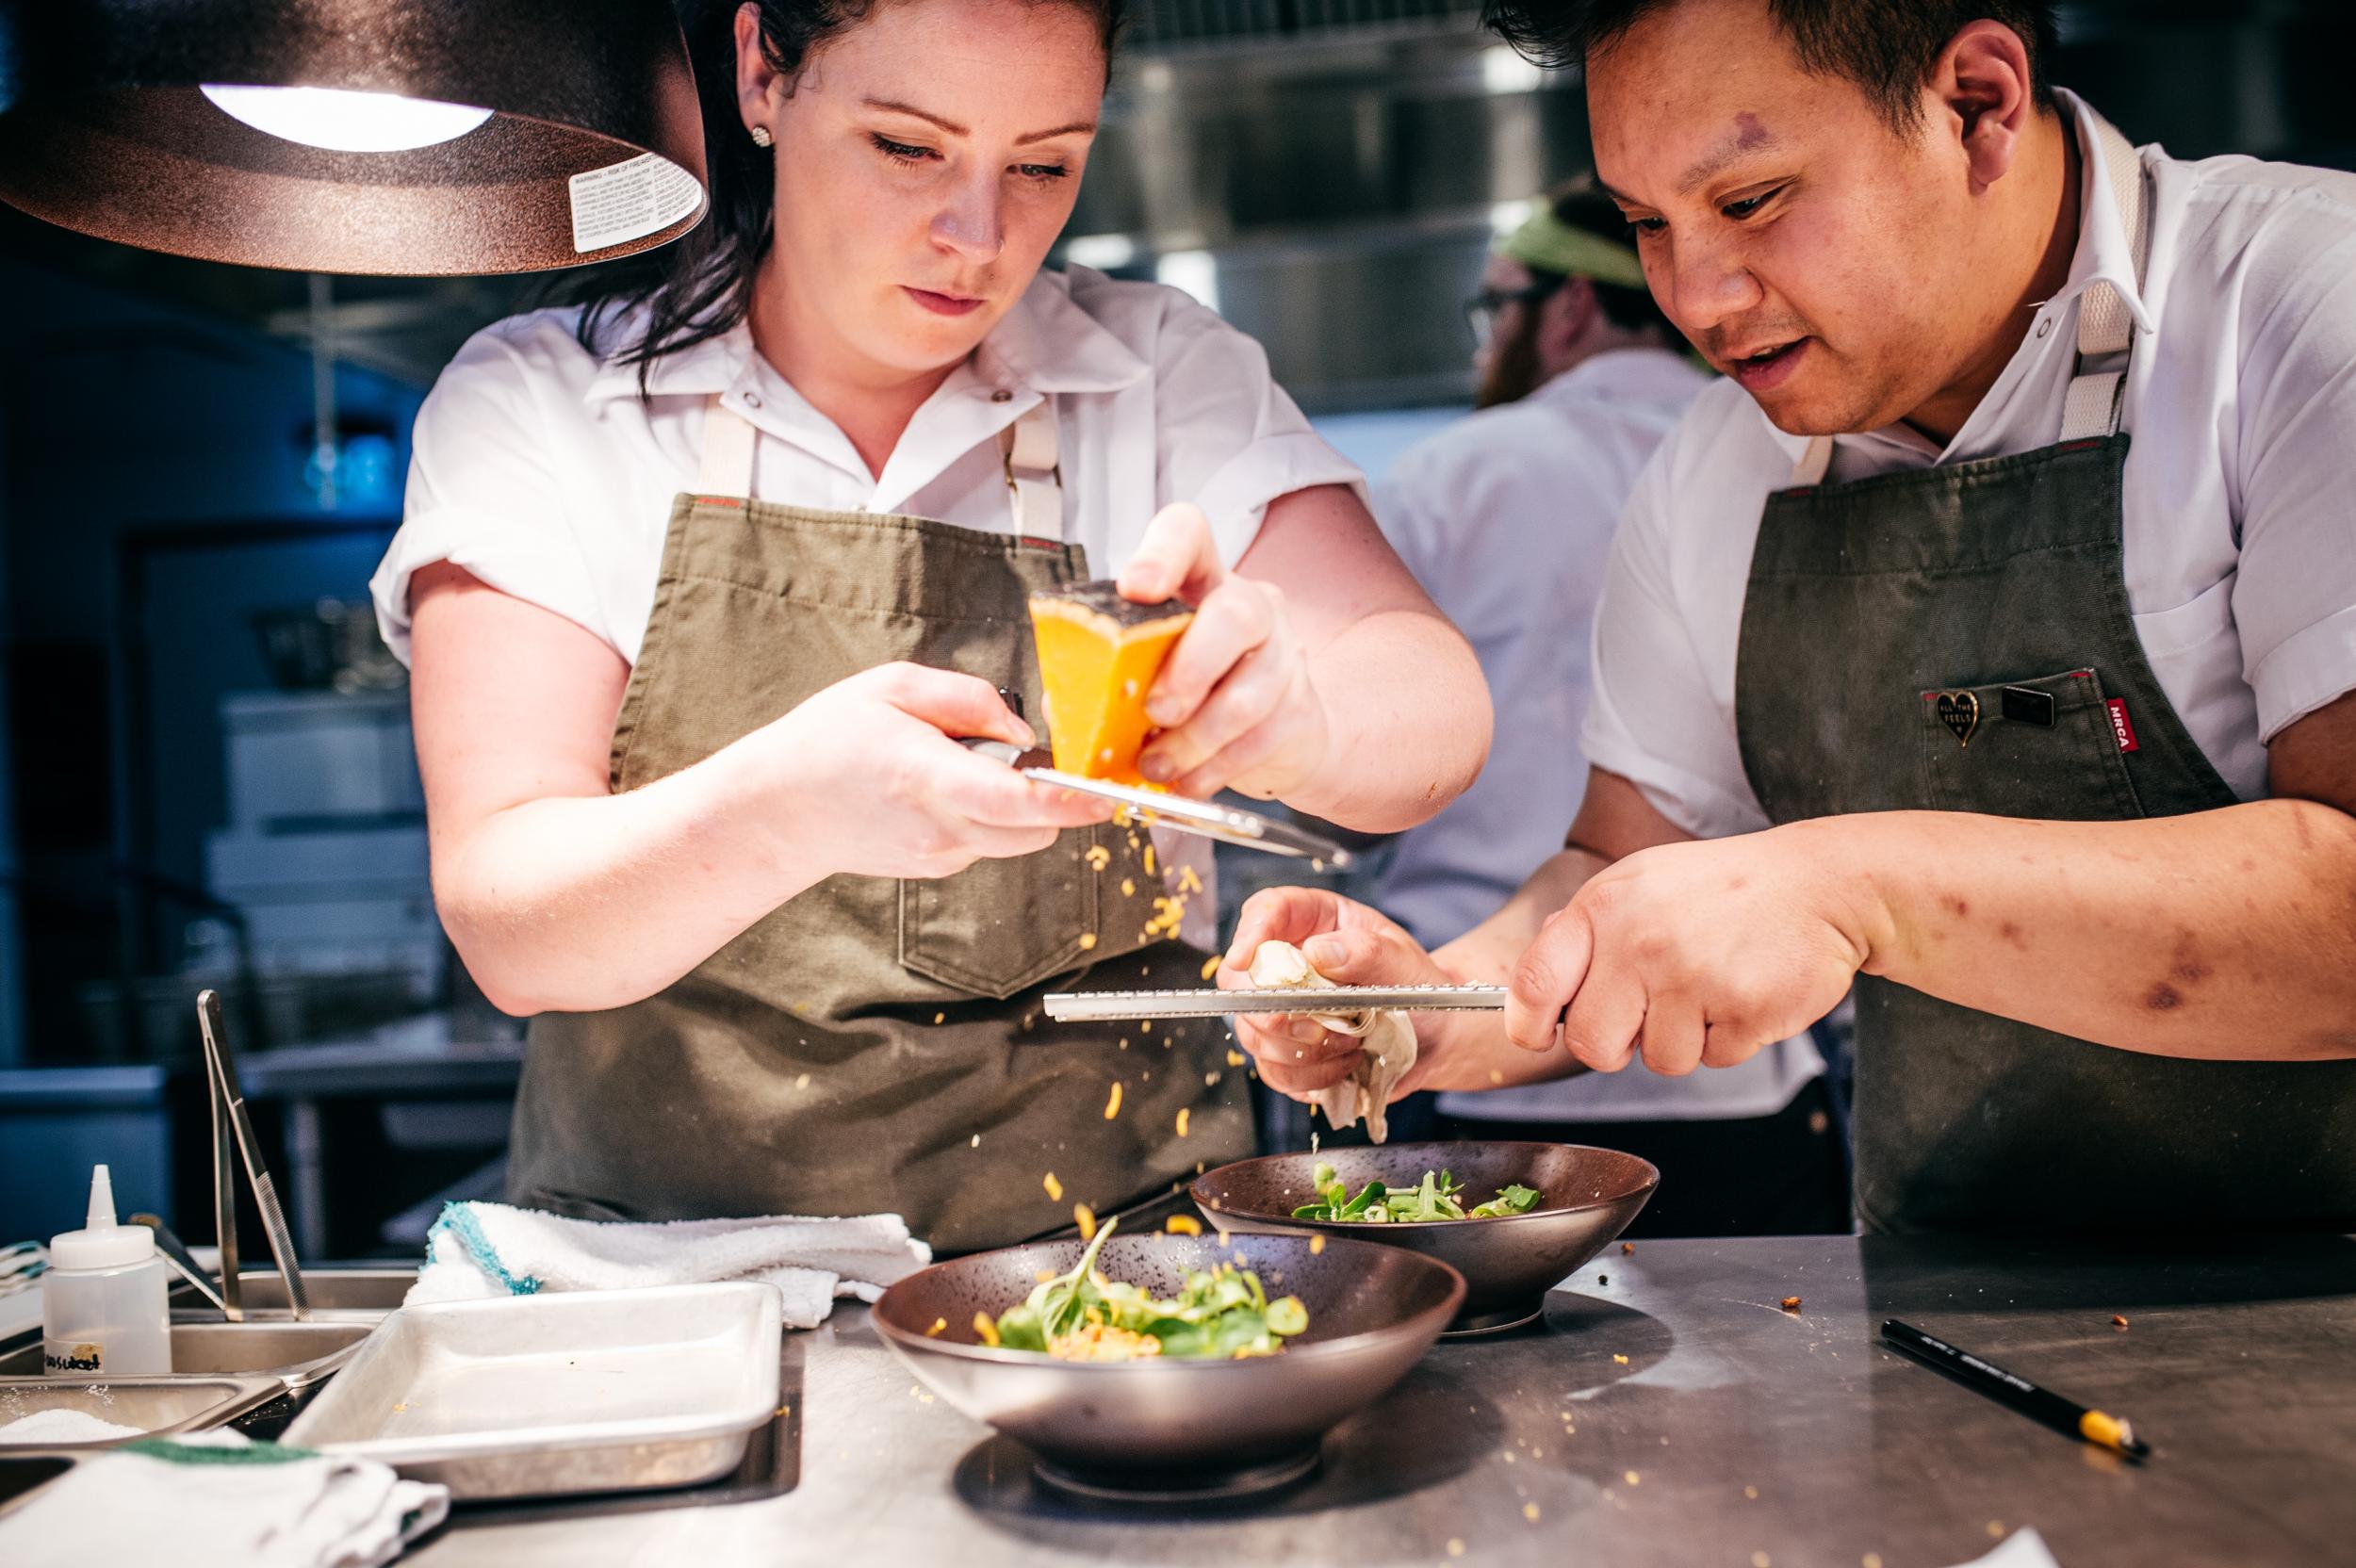 The kitchen at Biera, headed by pioneering chef Christine Sandford